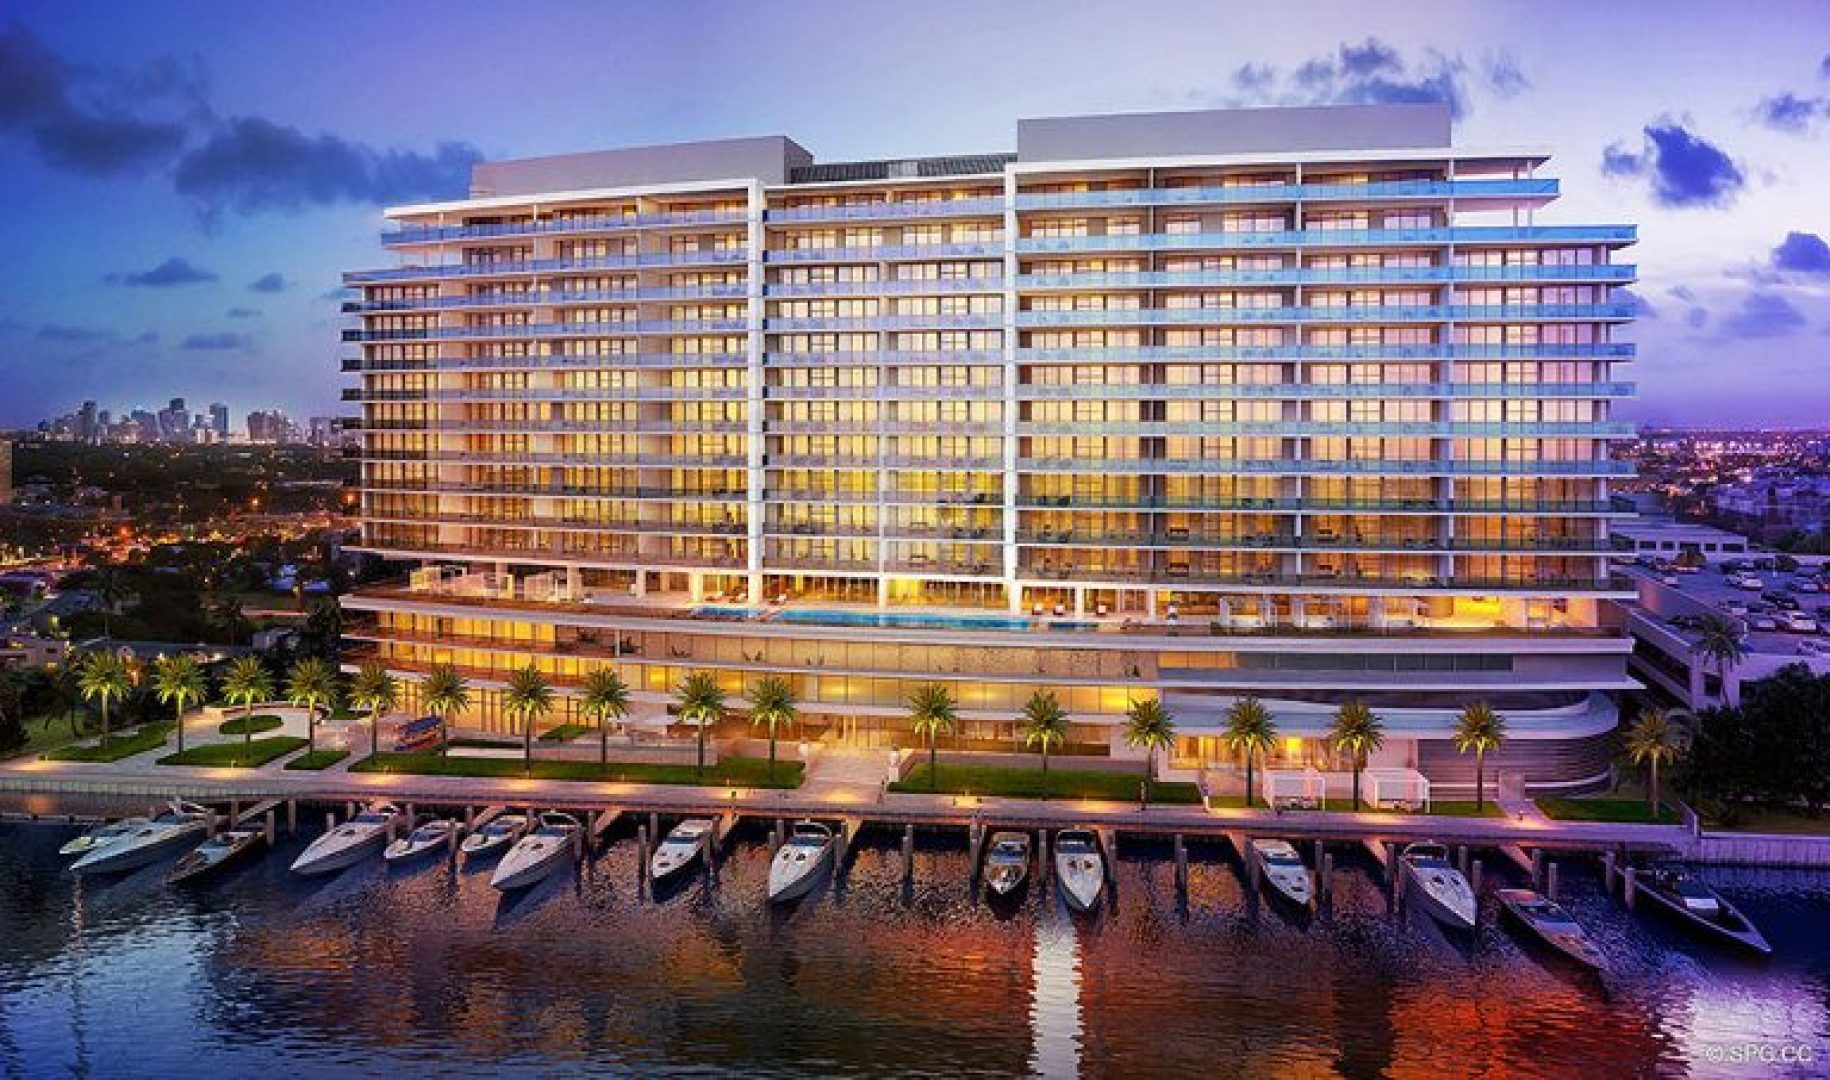 Architectural Concept for Riva, Luxury Waterfront Condos in Fort Lauderdale, Florida 33304.